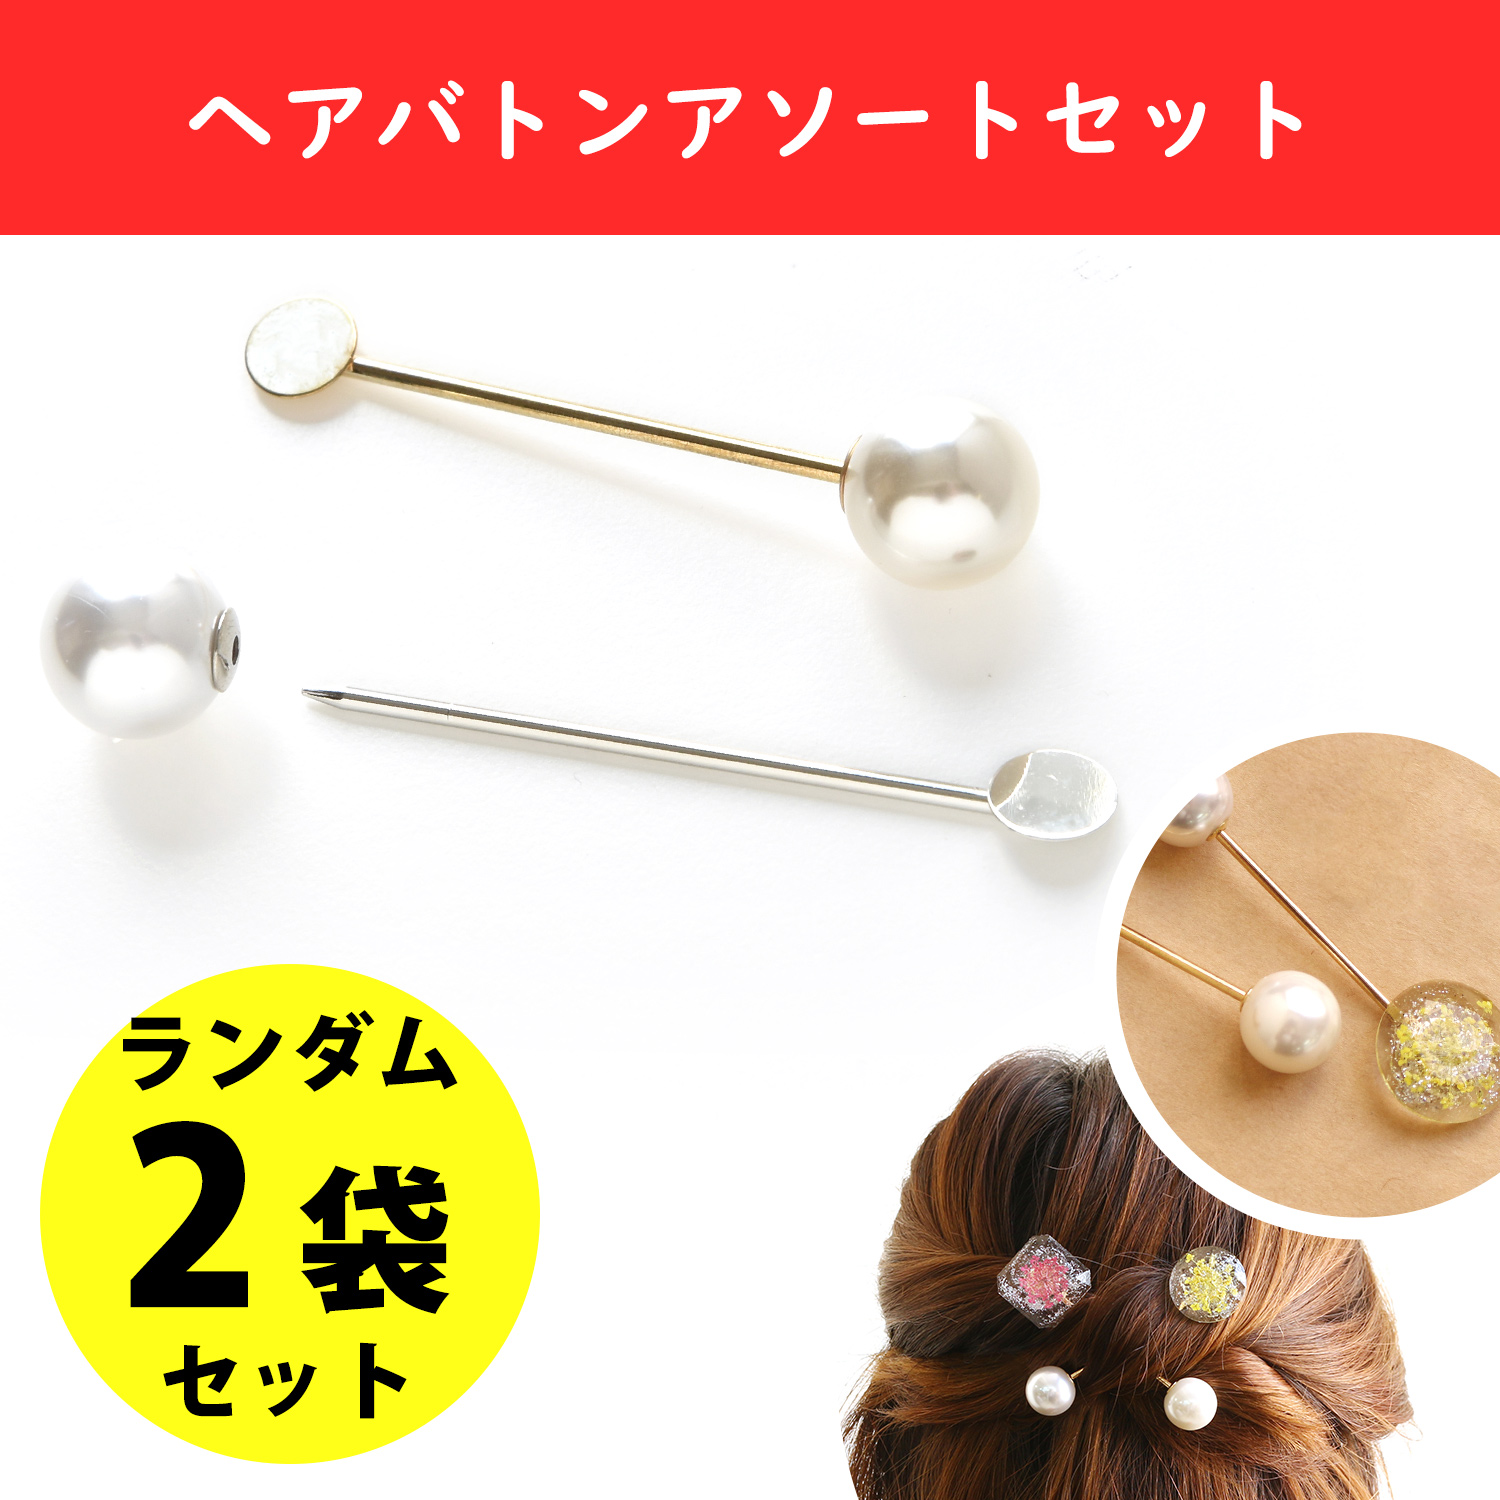 HB-SET Hair Sticks", with Bezels and Pearl Stoppers Length 7cm ",2 random bags (bag)